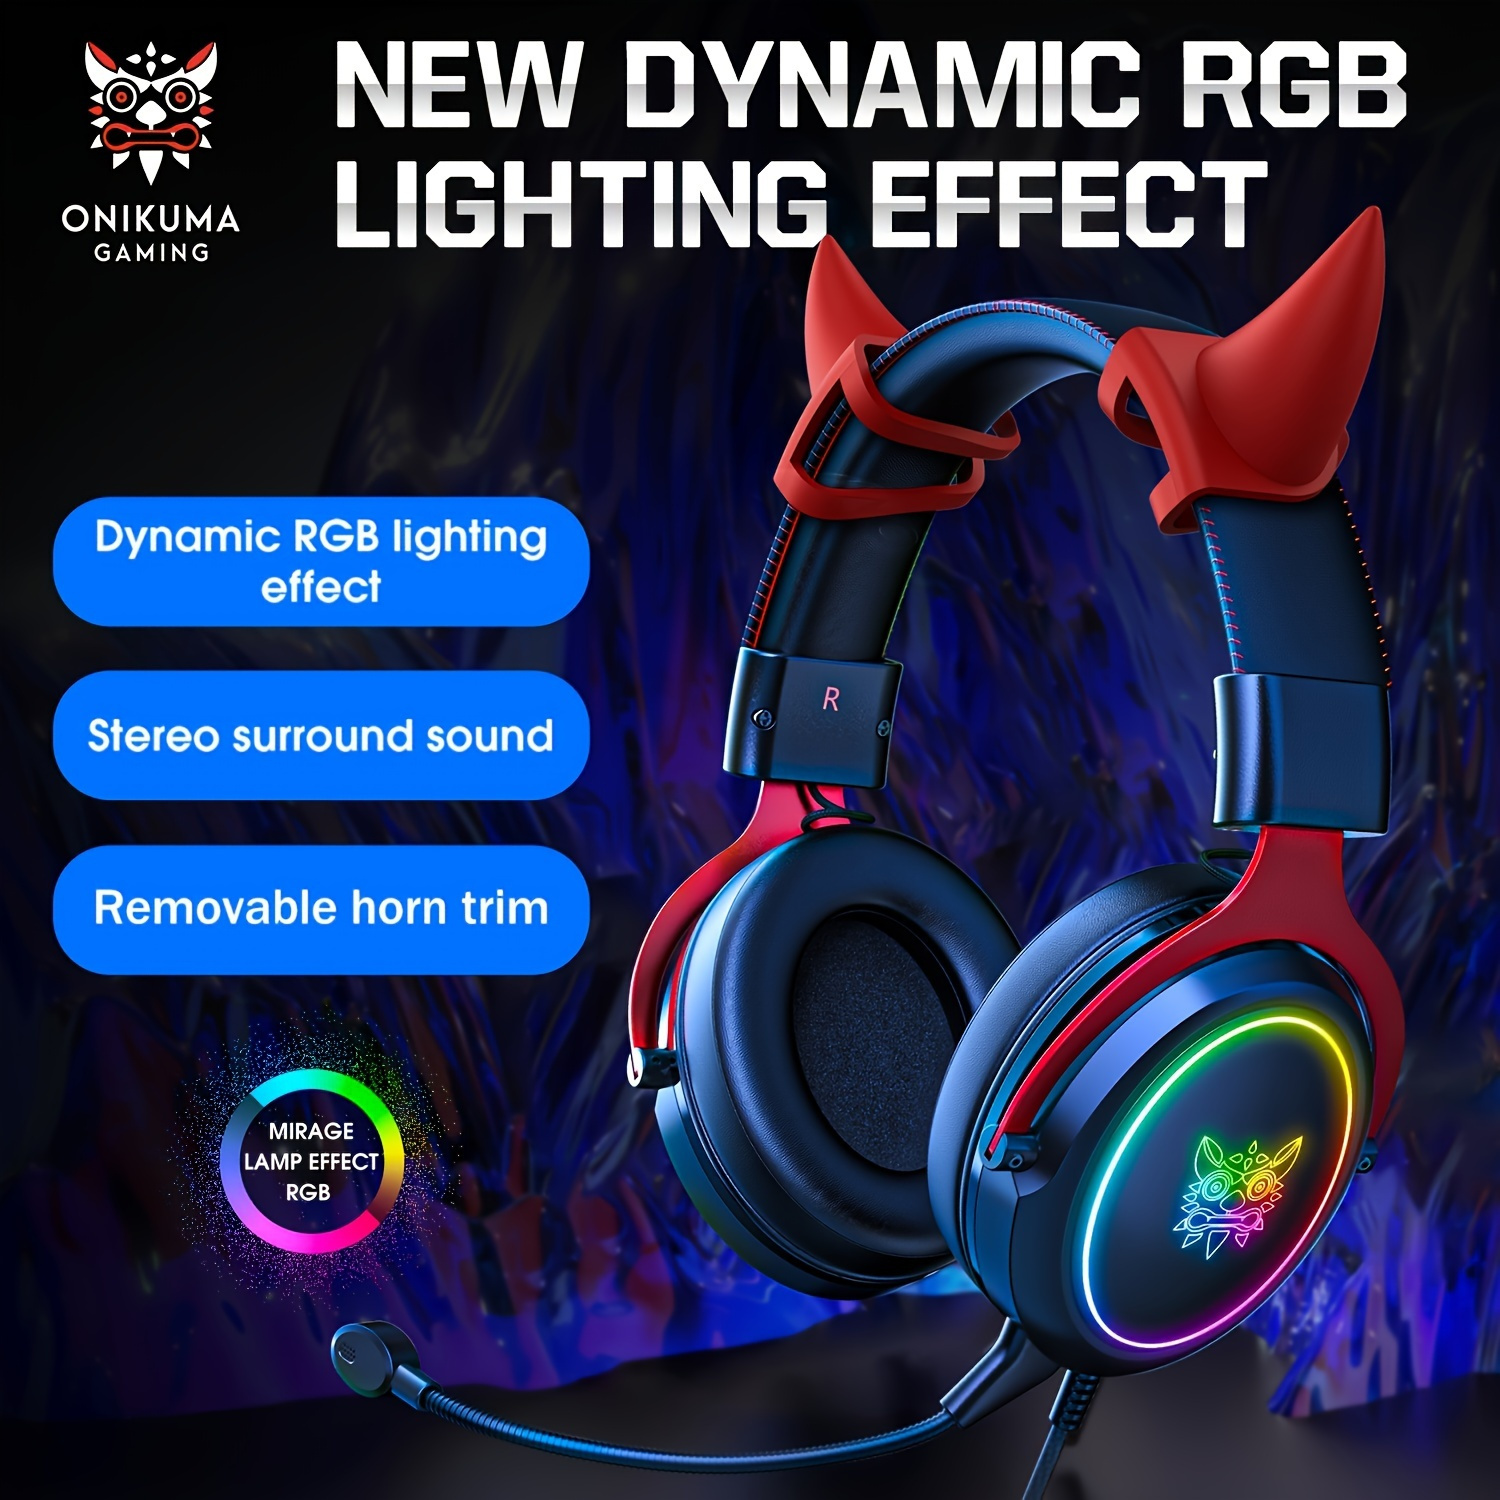 

Onikuma X10 Wired Headset With Detachable Horns And Hd Microphone Dynamic Rbg Light Detachable Cowhorn Decoration Comfortable Gaming Headphones For Pc Gamer